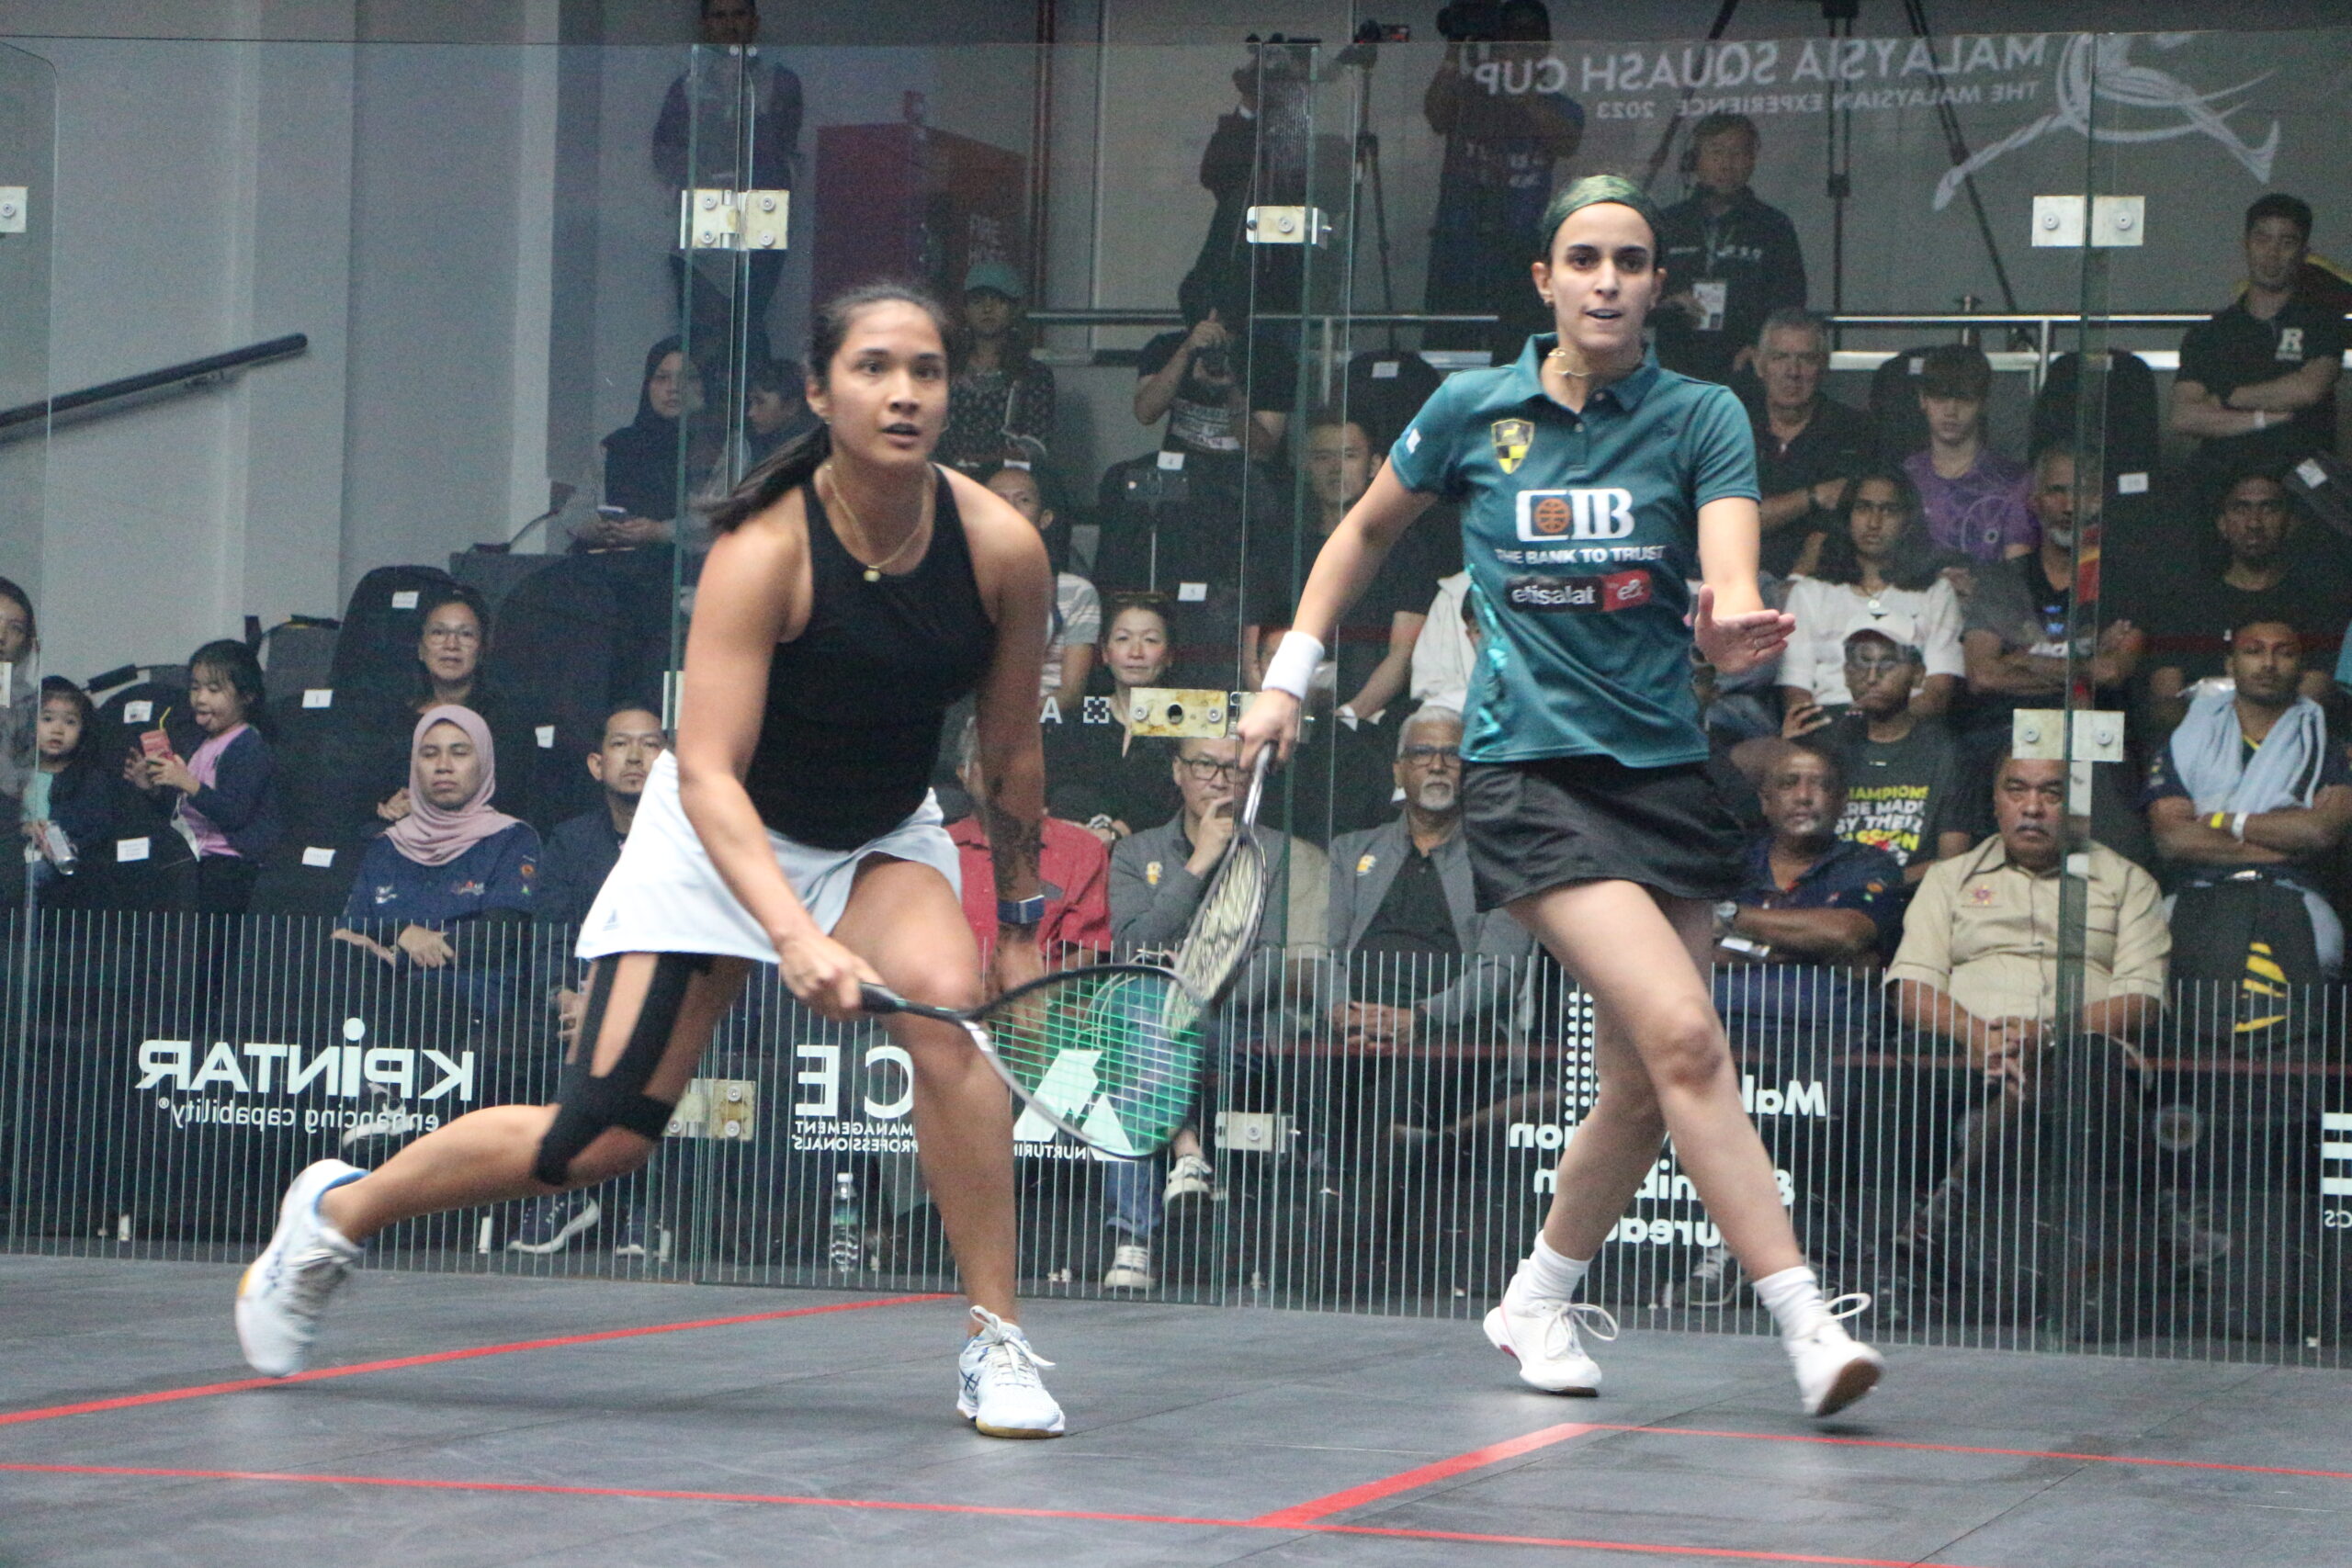 Nour el tayeb playing in the squash tournament